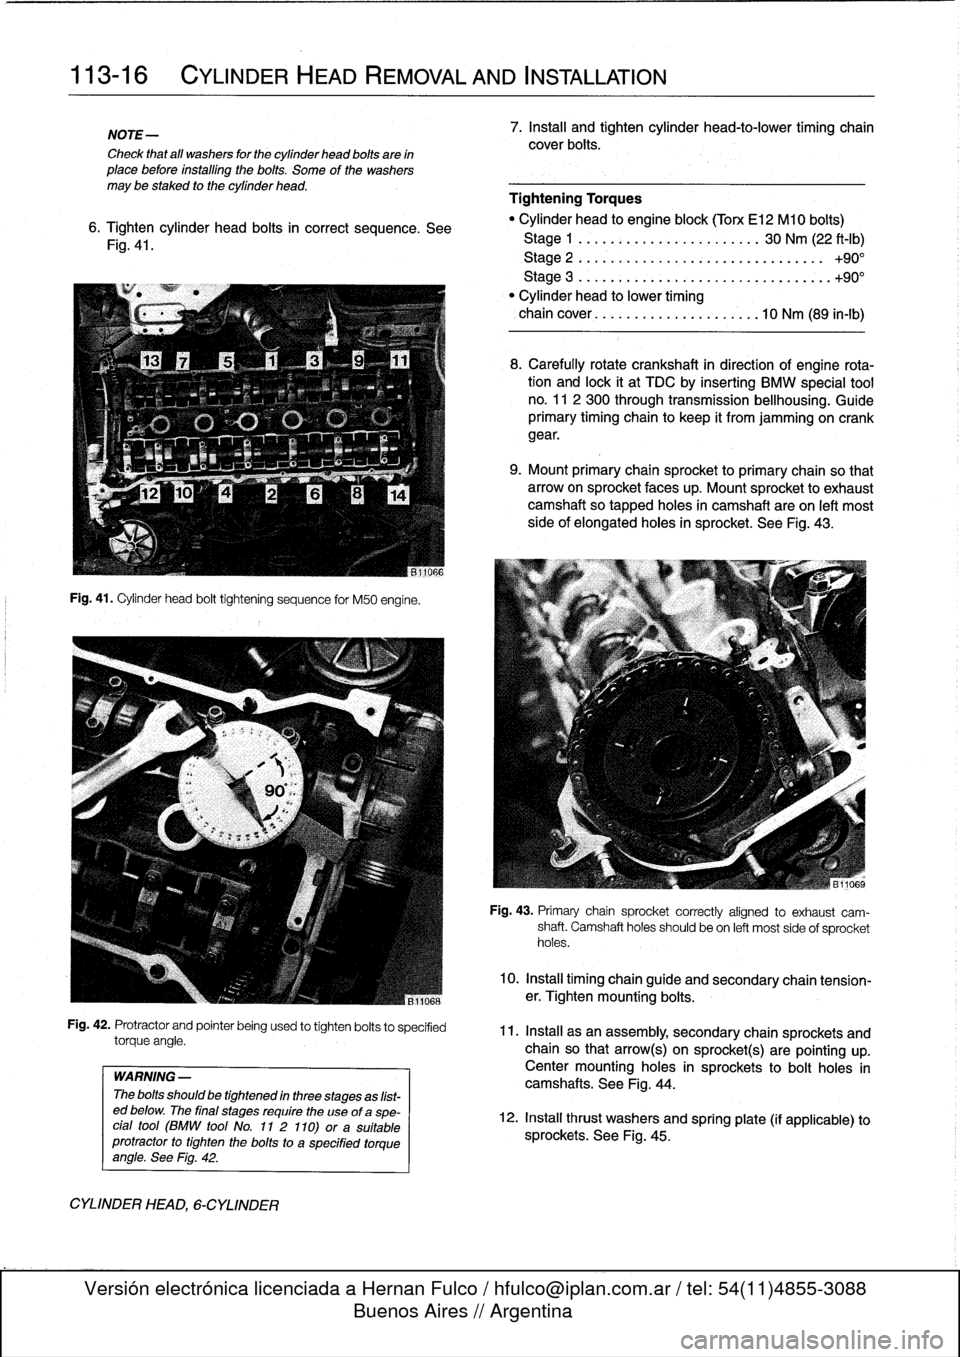 BMW 323i 1993 E36 Owners Guide 
113-16

	

CYLINDER
HEAD
REMOVAL
AND
INSTALLATION

NOTE-

Check
that
all
washers
for
the
cylinder
head
bolts
are
in
place
before
installlng
the
bolts
.
Some
of
the
washers
may
be
staked
to
the
cylind